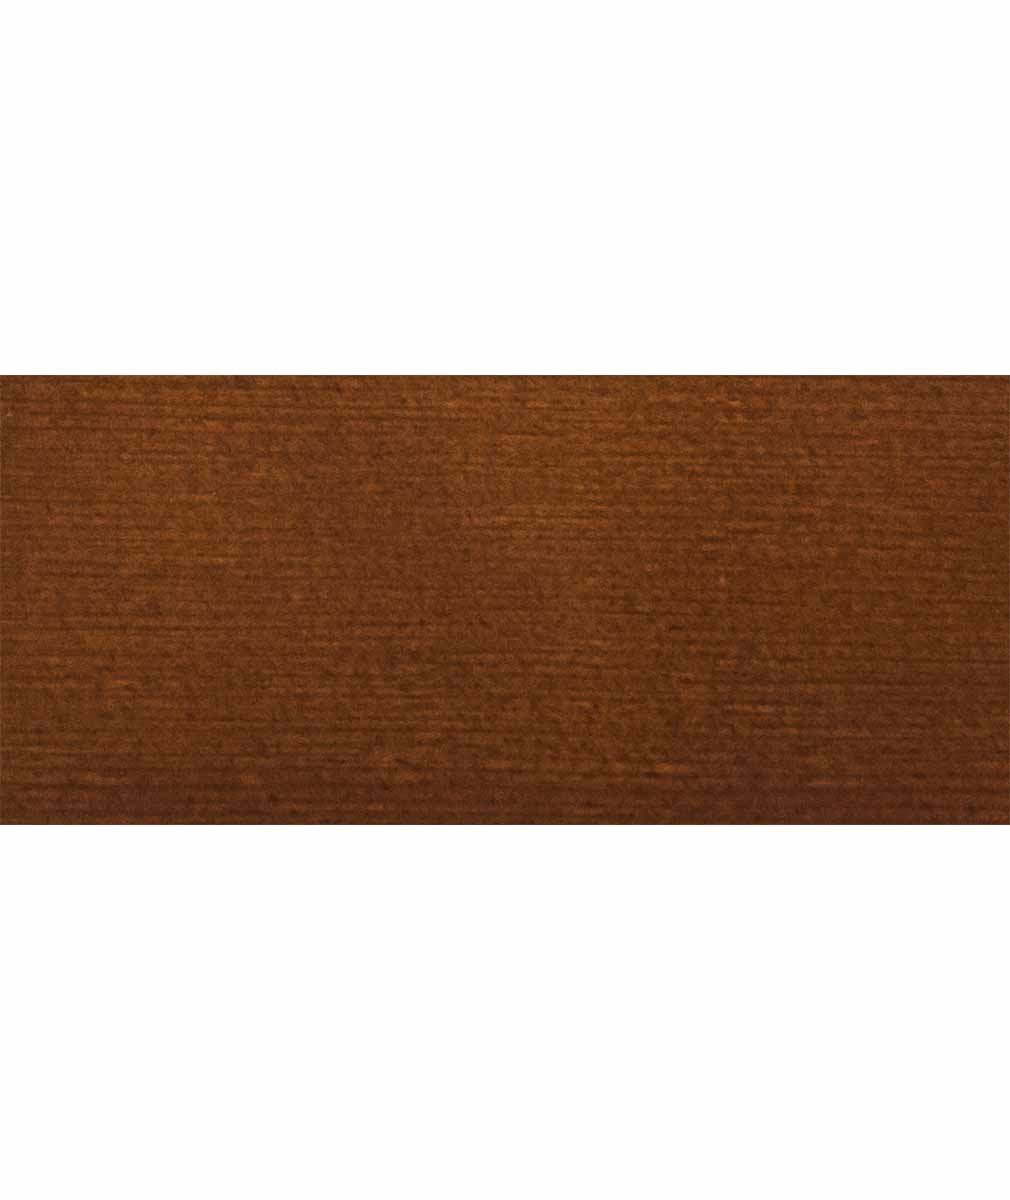 Shop Benjamin Moore&#39;s Arborcoat Semi-Transparent Finish in  Leather Saddle Brown at JC Licht.